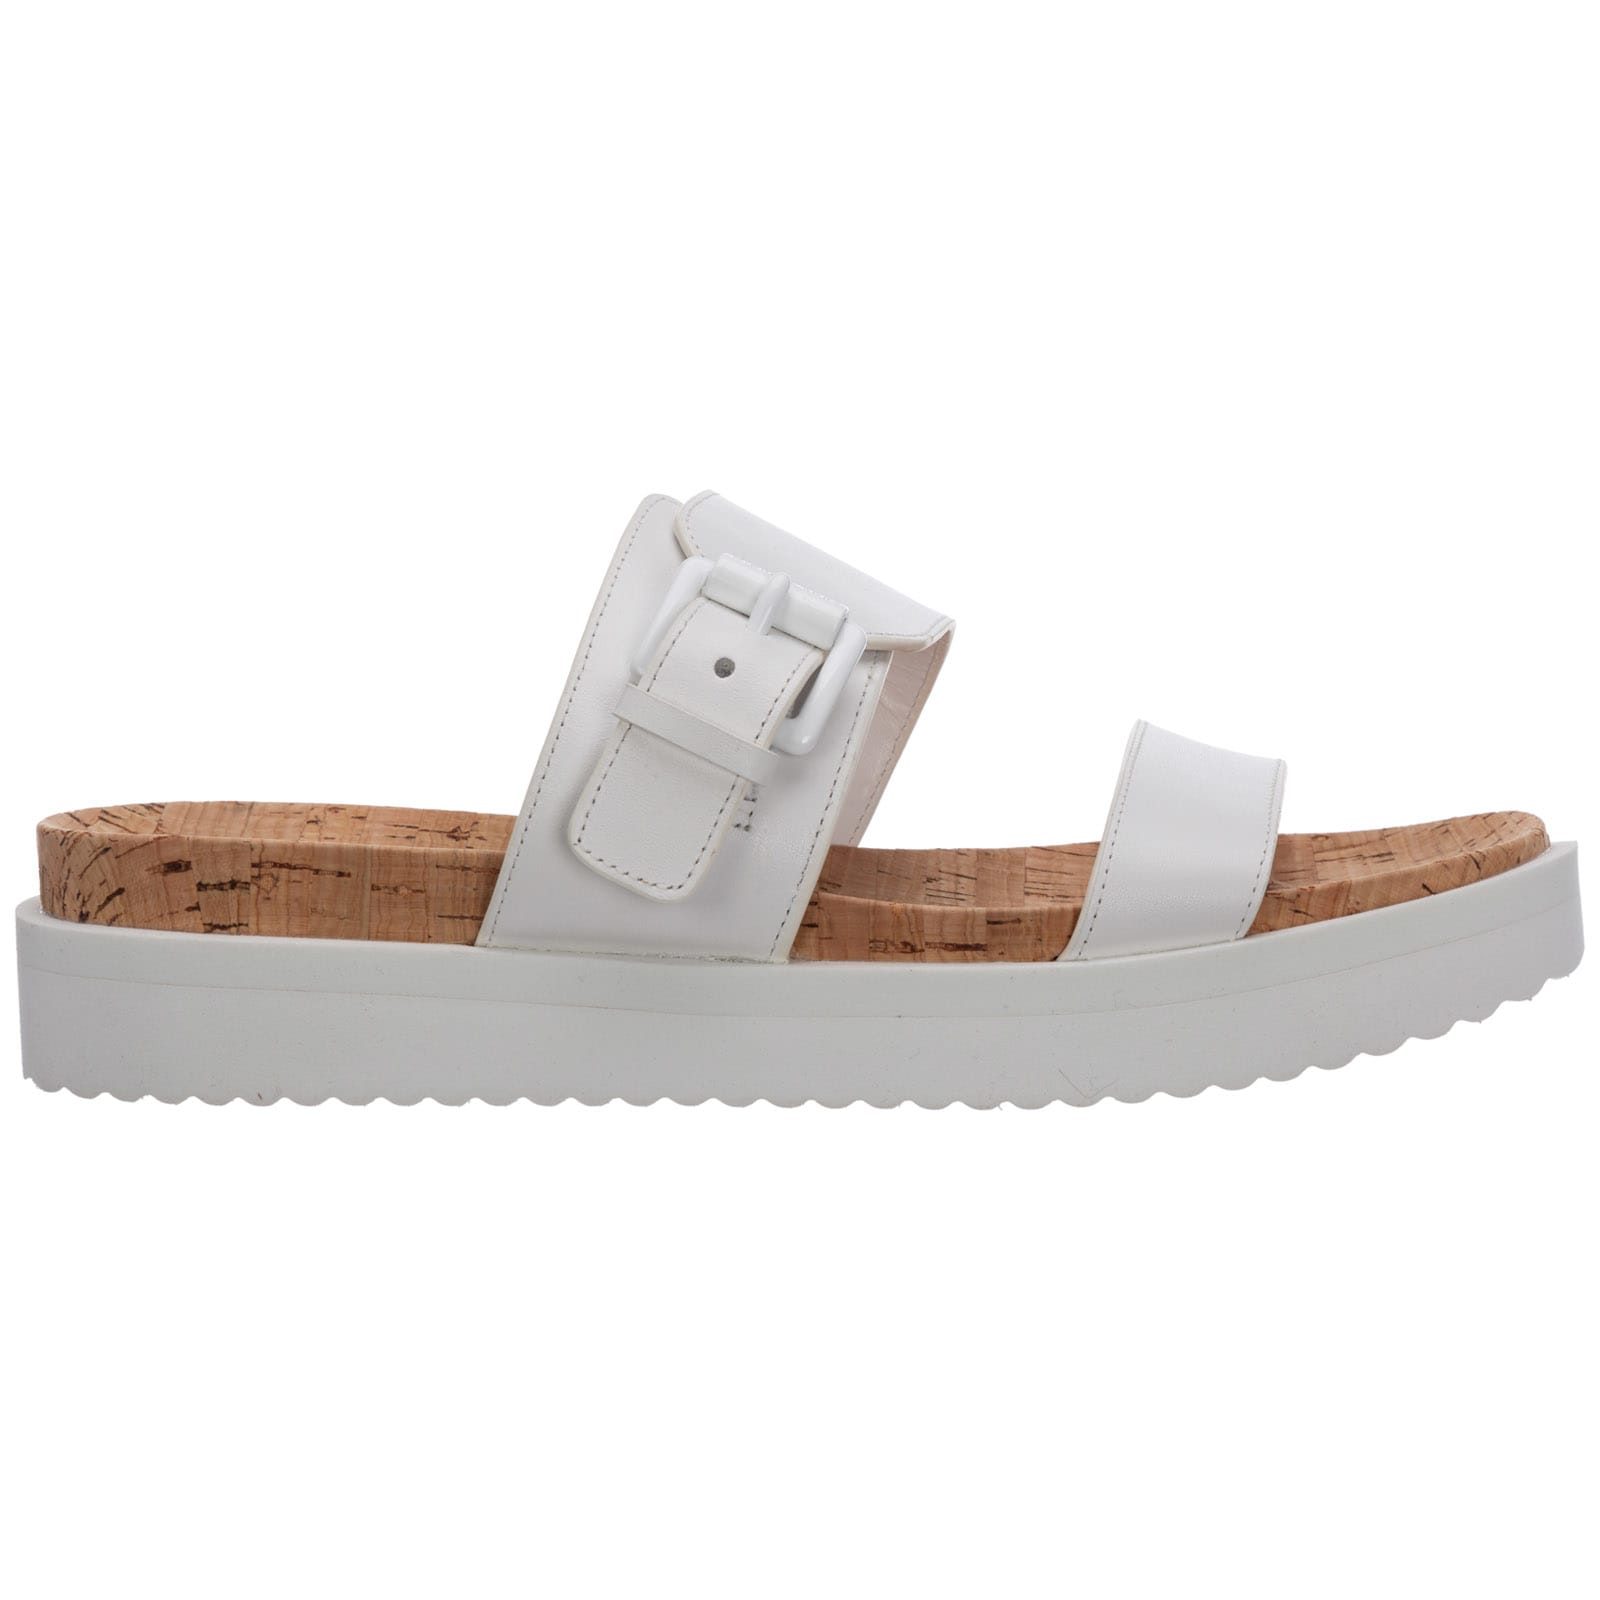 Buy Michael Kors Bo Sandals online, shop Michael Kors shoes with free shipping